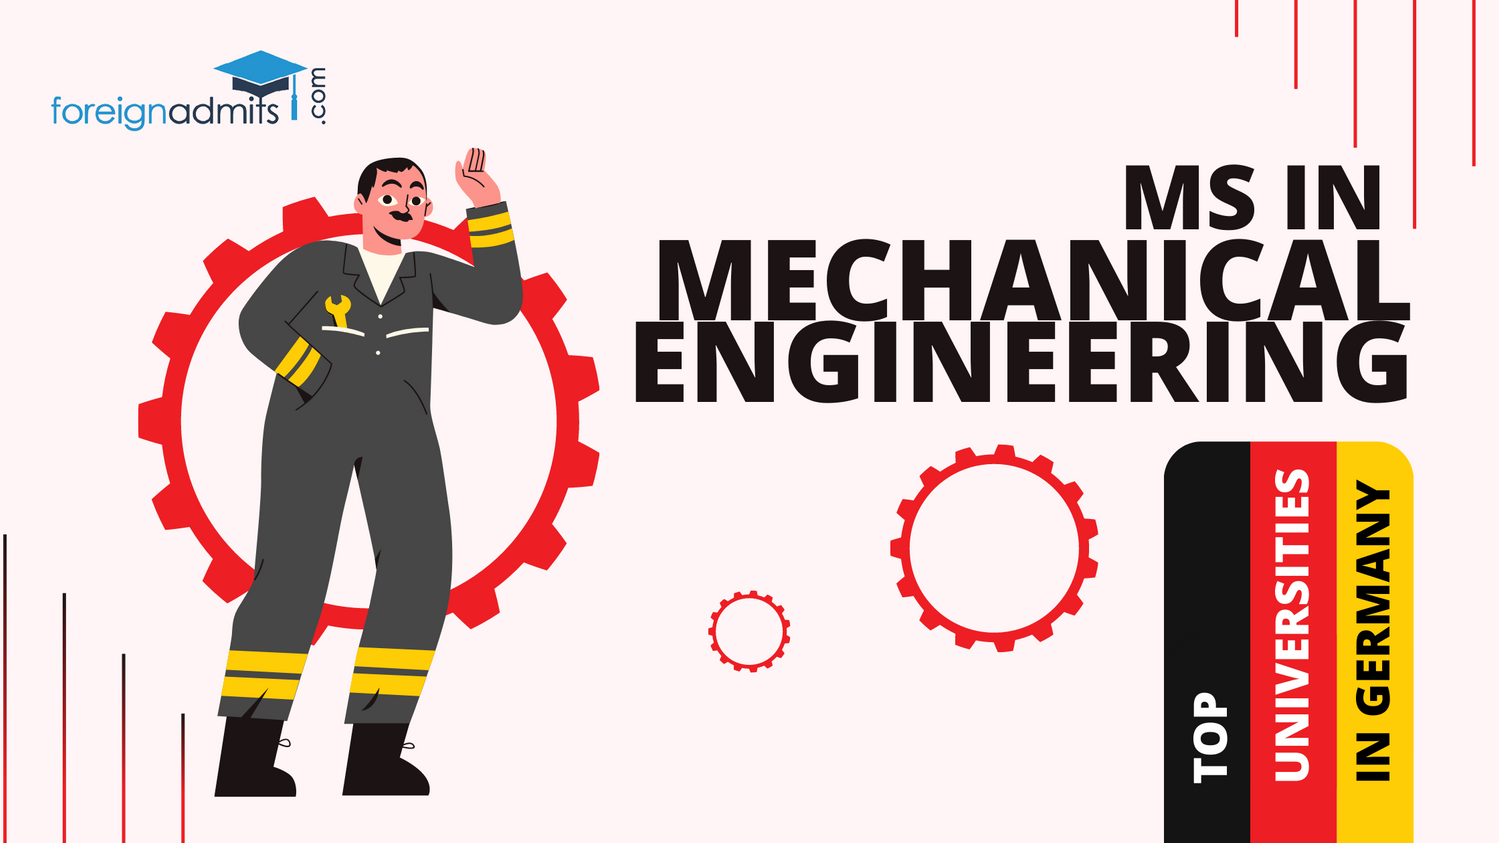 MS in Mechanical Engineering in Germany - ForeignAdmits